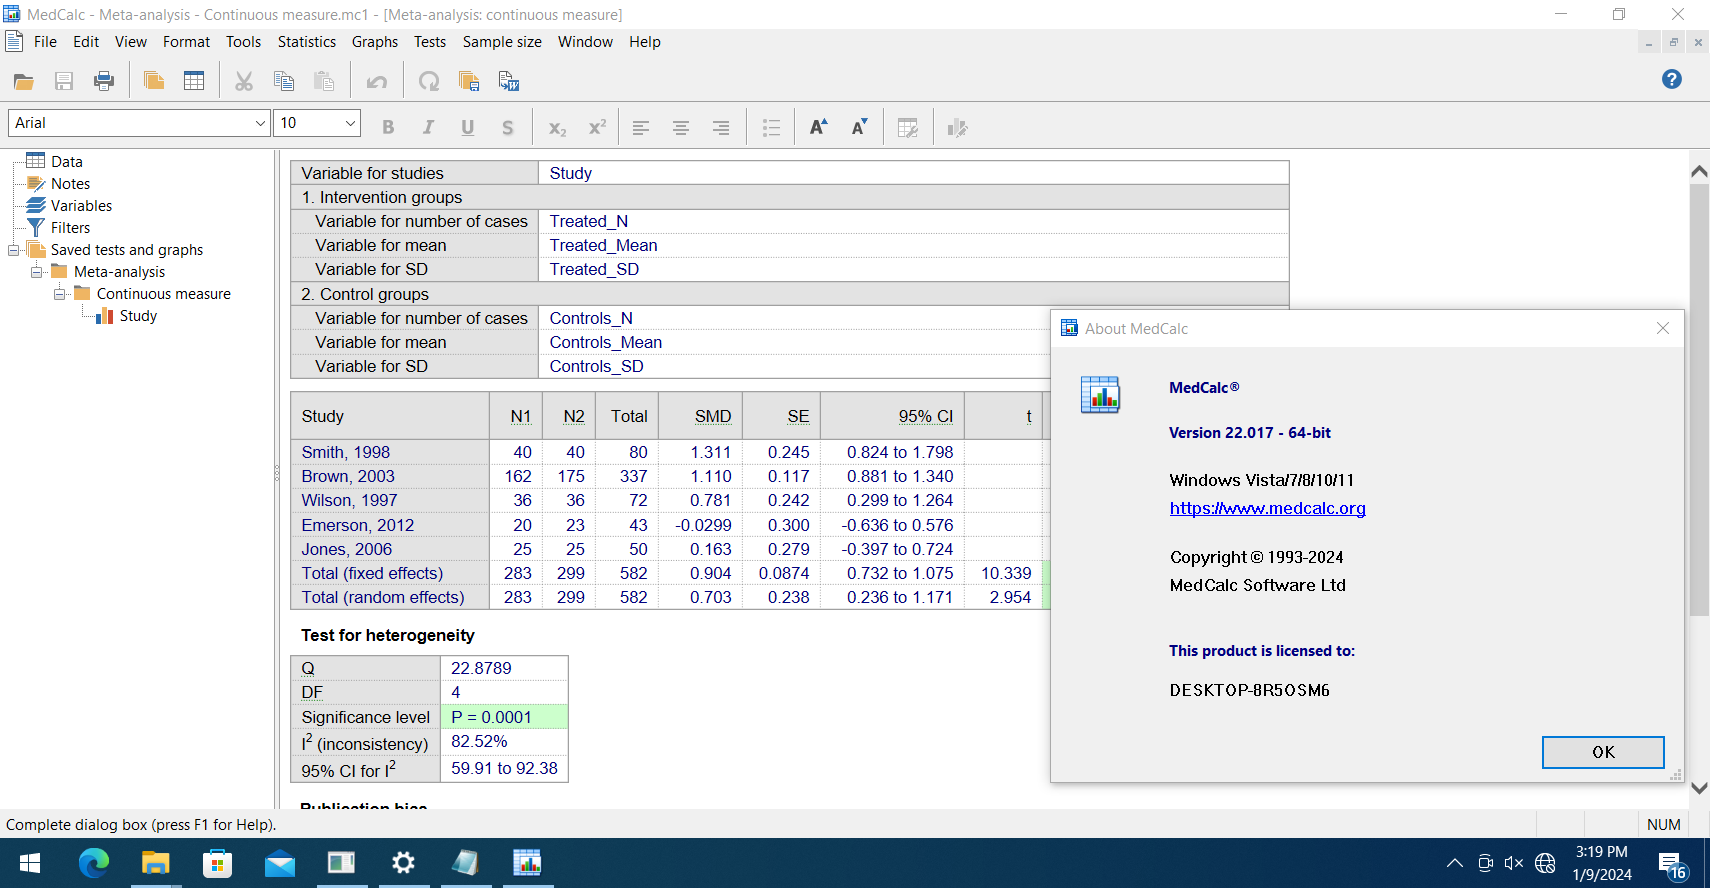 Working with MedCalc 22.017 full license